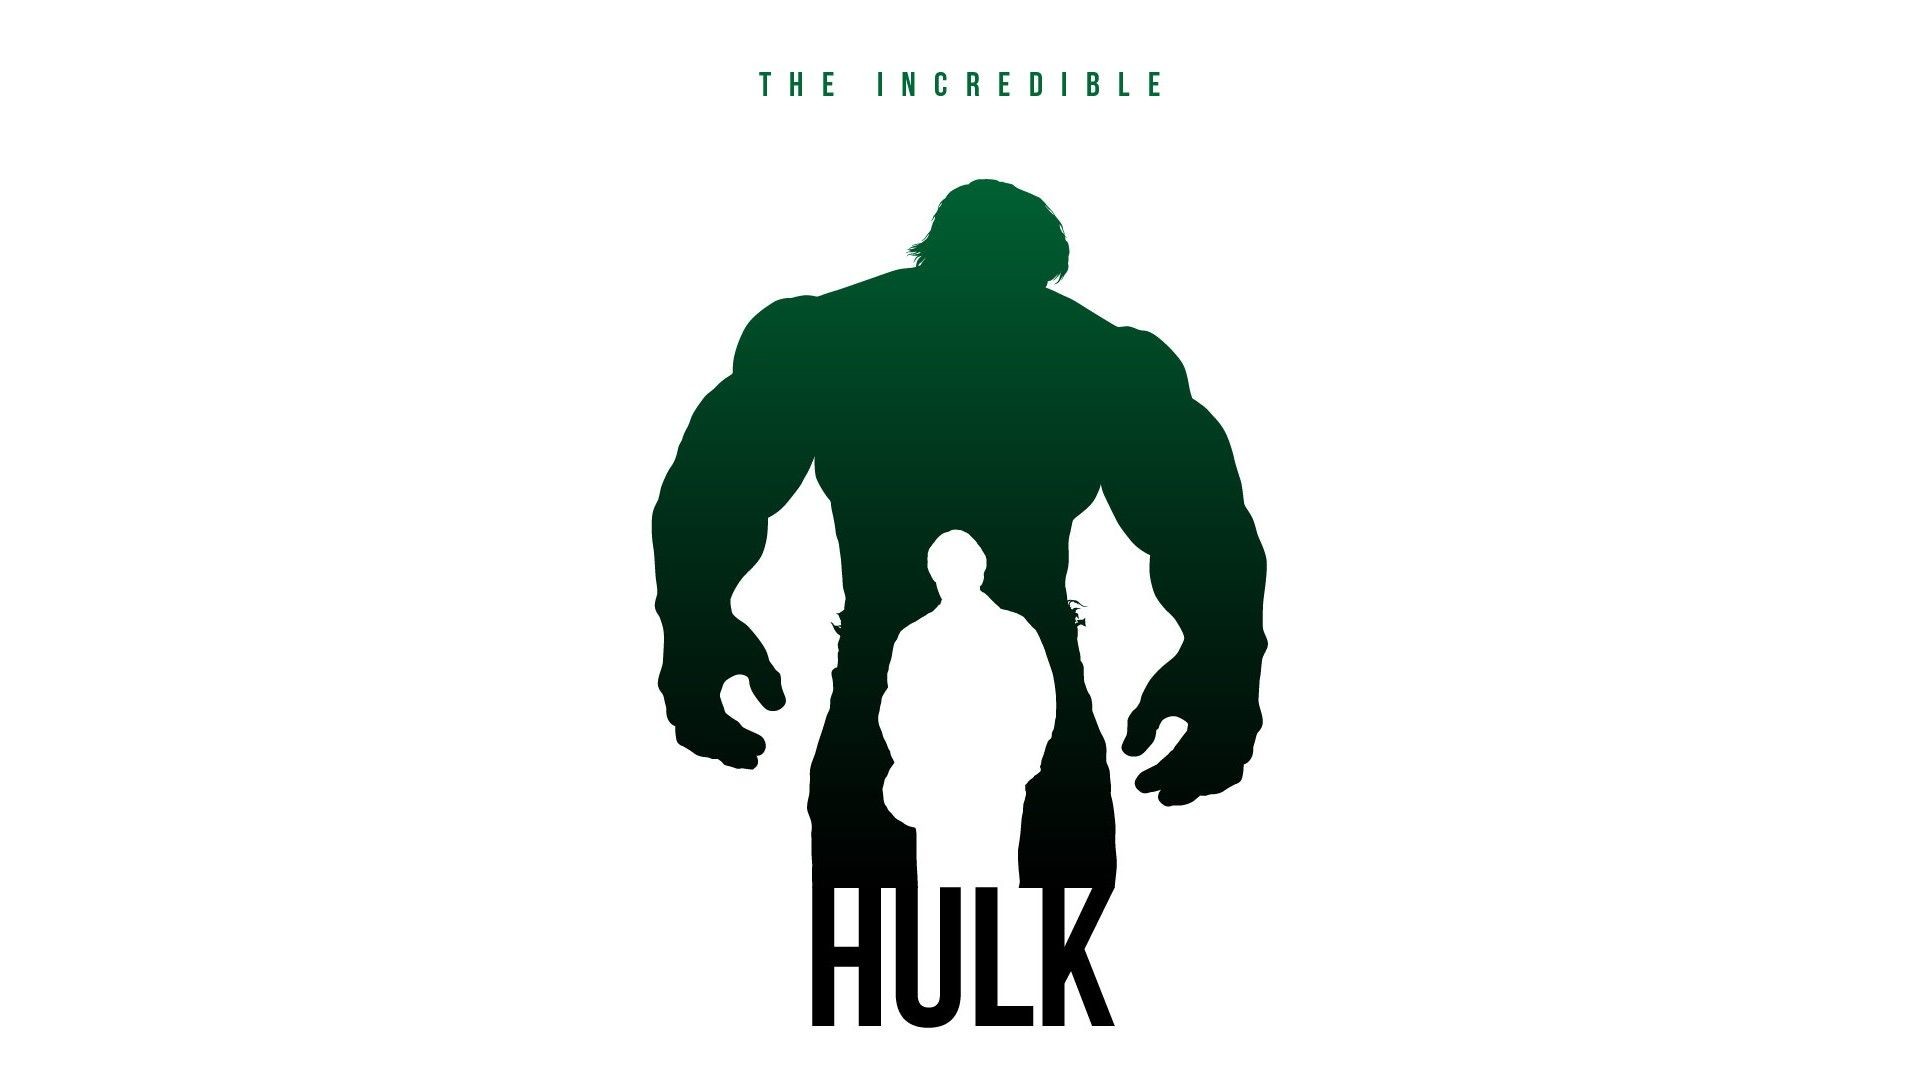 Hulk Widescreen Background Wallpapers 4548 – HD Wallpapers Site